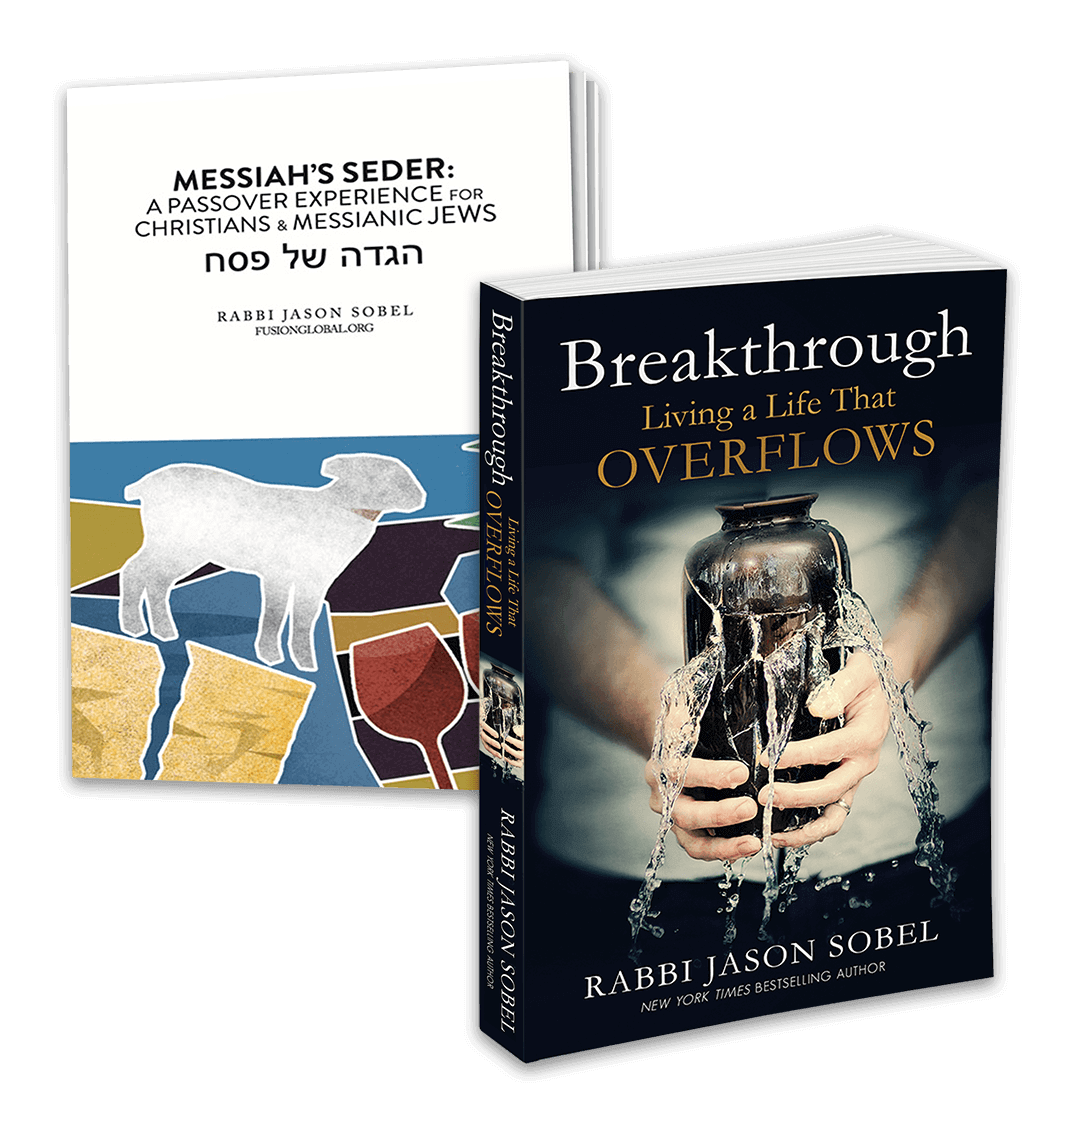 Breakthrough: Living a Life that Overflows book cover & Messiah's Seder: Passover Experience for Christians and Messianic Jews digital book cover